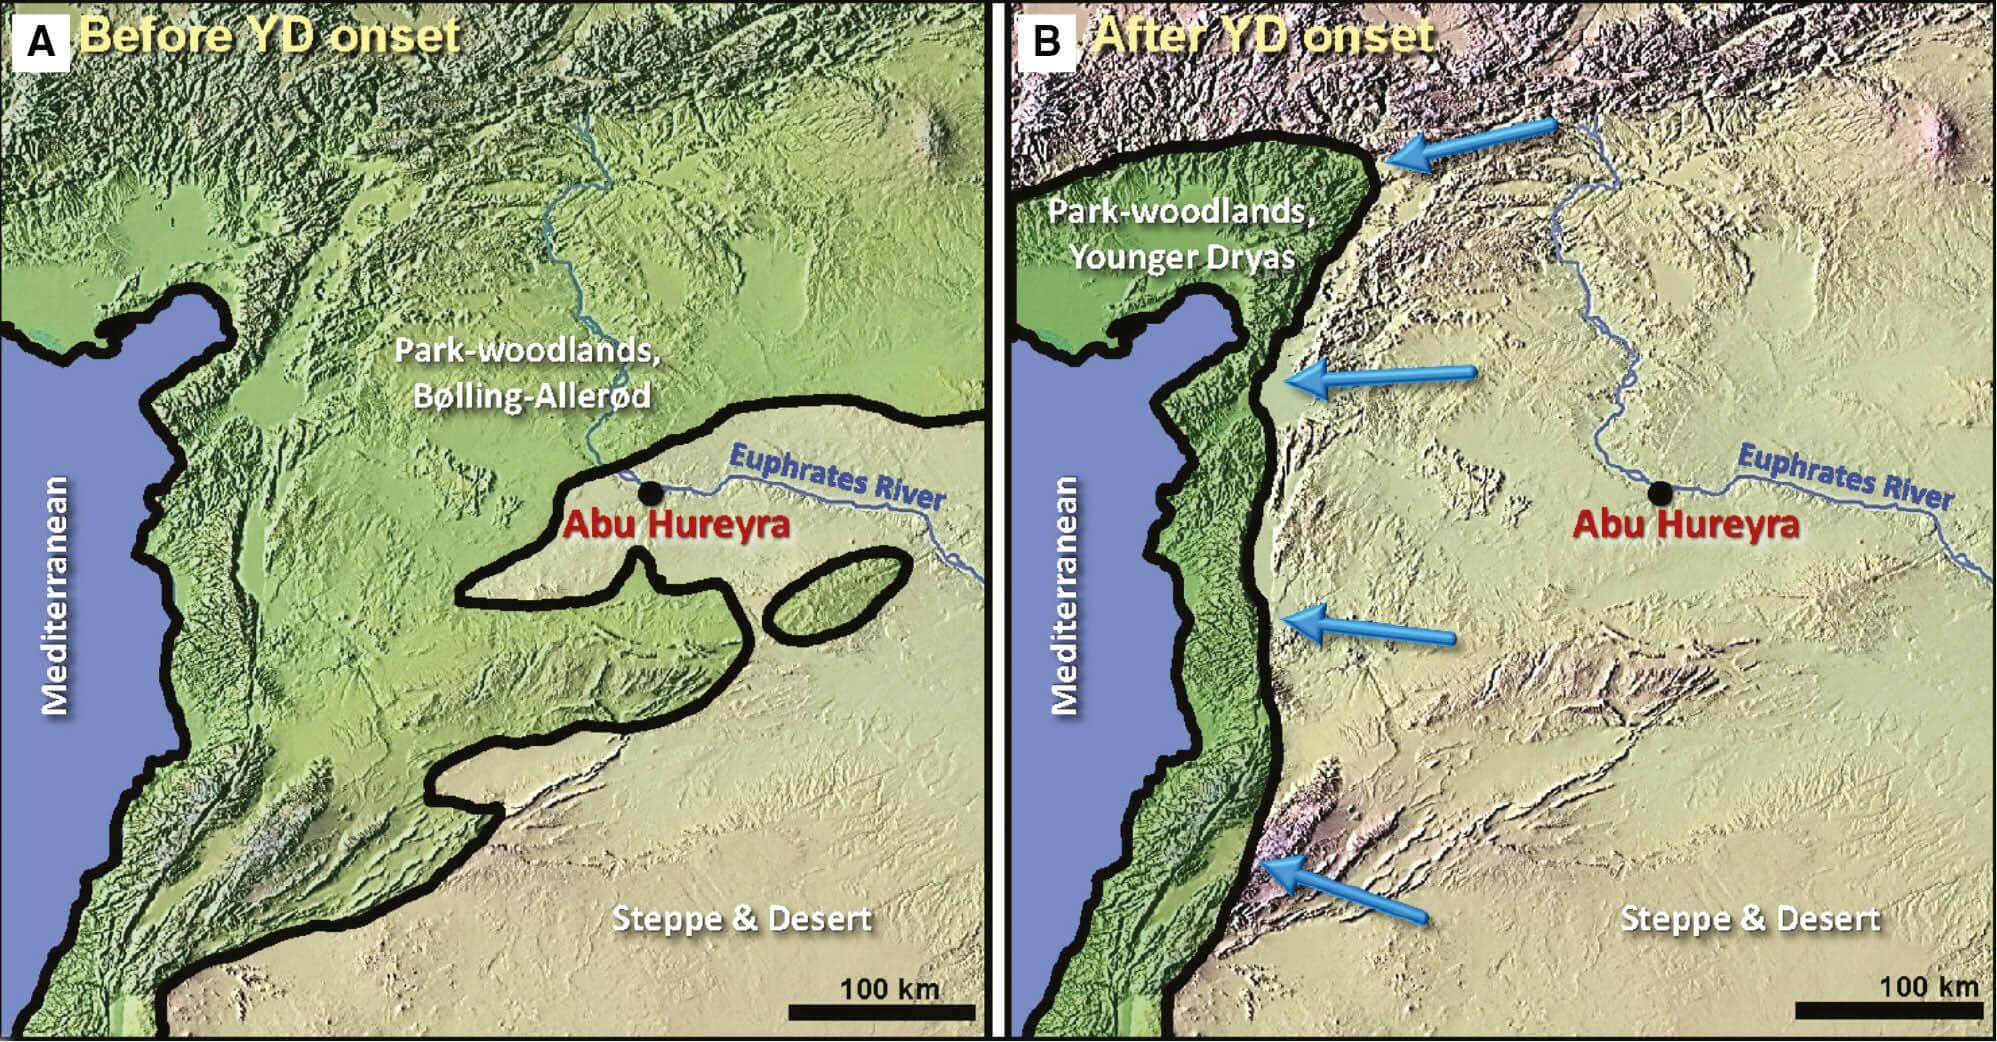 Figure 2:Plant biogeographic responses to YD climate change in the Middle East. Darker green represents park-woodlands; greenish-tan represents arid steppes; reddish-tan represents desert terrain and largely unvegetated mountains. (A) Near the end of the Bølling-Allerød, park-woodlands grew close to Abu Hureyra and would have allowed the gathering of readily available fruits, nuts, and edible plants. (B) After the YD onset, arid steppes expanded and park-woodlands retreated ~200 km westward almost to the Mediterranean coastline more than 200 km west of Abu Hureyra, significantly changing available food resources. Images adapted and colorized from Figure 3.18 in Moore et al. [3] In assembling these maps, Moore et al. [3] and Hillman [74] used isopoll data from Huntley [75, 76], Huntley and Birks [77], Huntley and Webb [78], and Webb [79].